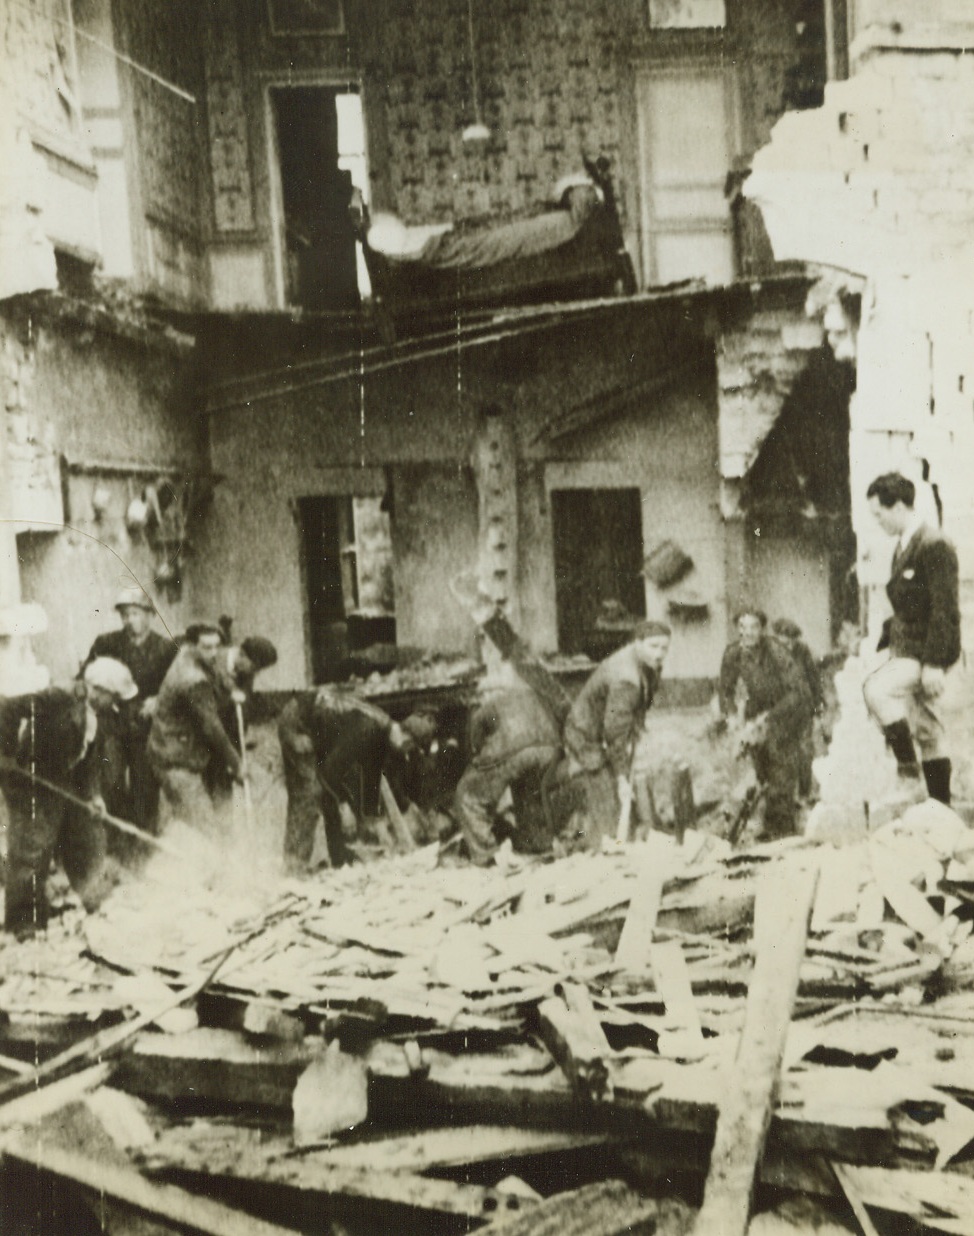 Cherbourg Citizens Dig Out, 6/29/1944. France – Returning to their homes after the capture of Cherbourg by the Allies, citizens of the French city start the important task of digging out the debris to start reconstruction operations. The scene of the most bitter fighting on the Normandy Peninsula, shattered homes are evidence of the terrific artillery fire from both the Allies and the Nazis the city was subjected to. Credit: Signal Corps Radiotelephoto from ACME;